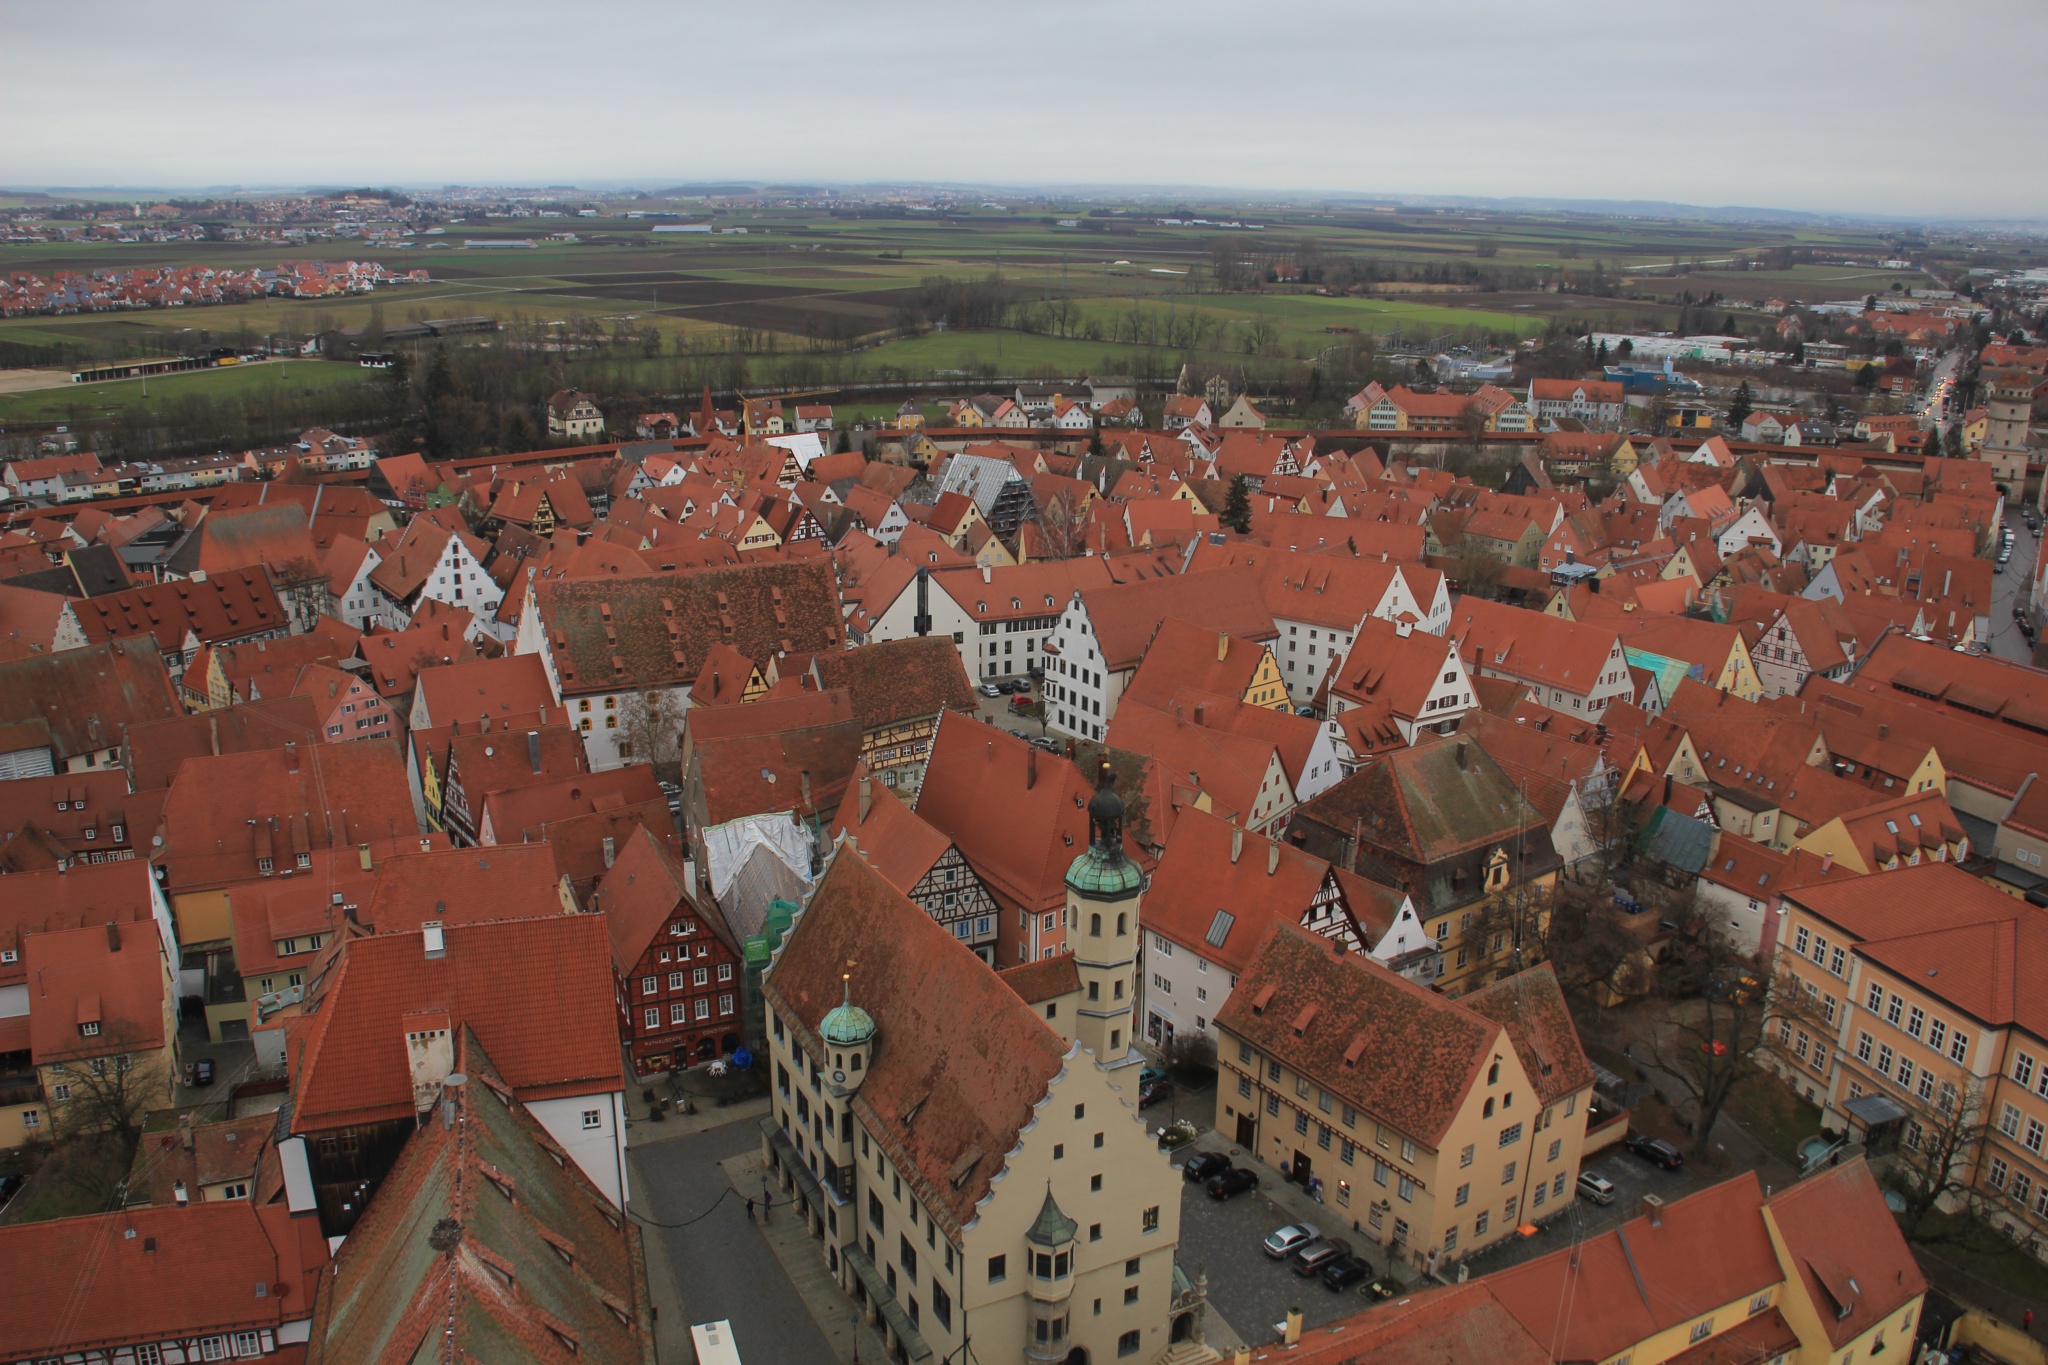 The view from the belltower of Saint George's Church in Nördlingen, Germany is the same one seen at the end of the 1971 movie musical, Willy Wonka and the Chocolate Factory.